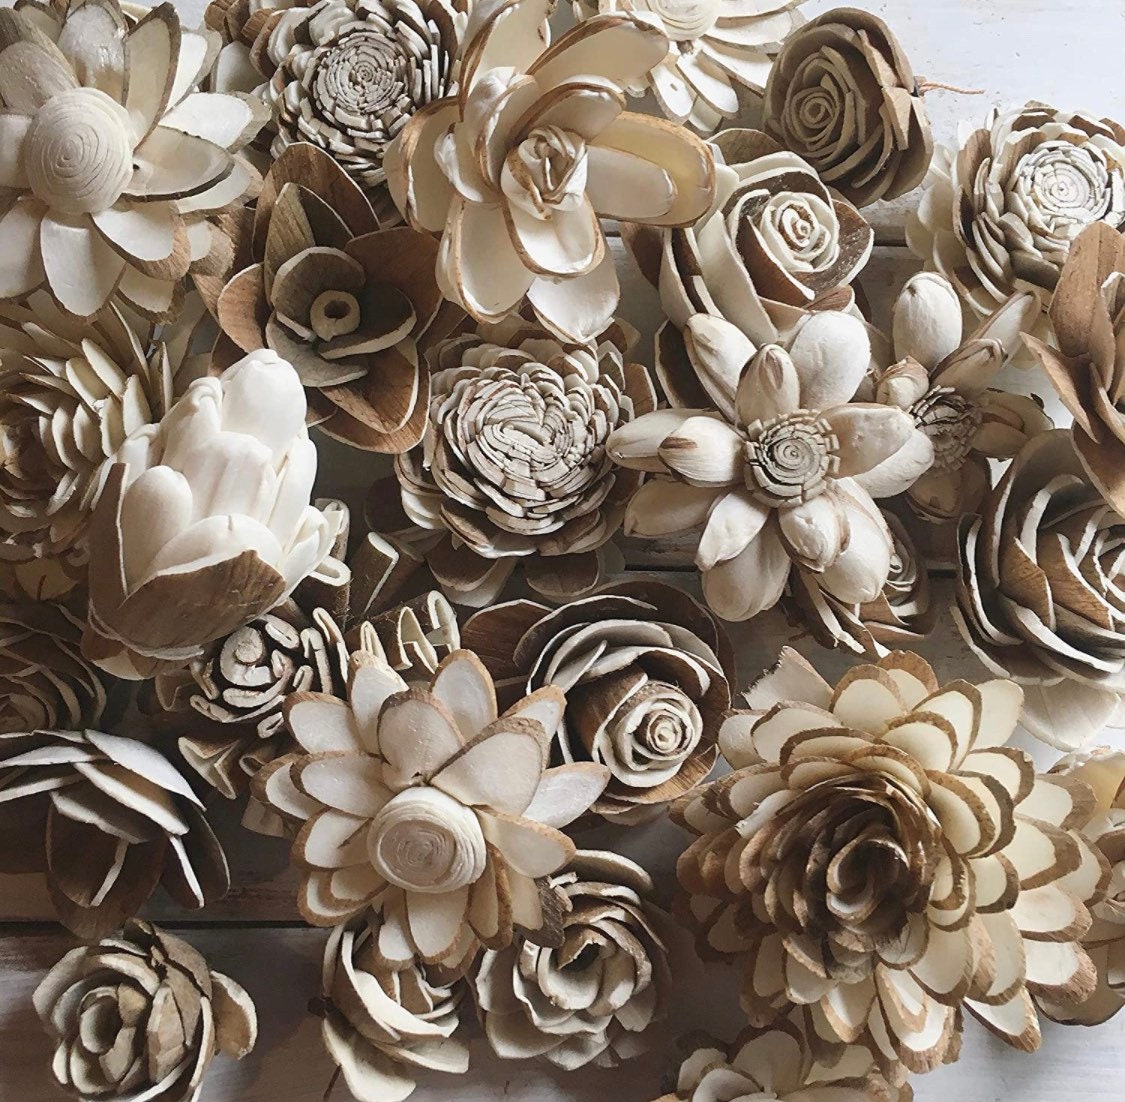 Wood flowers - Sola Wood Roses- artificial flower forms 10ct